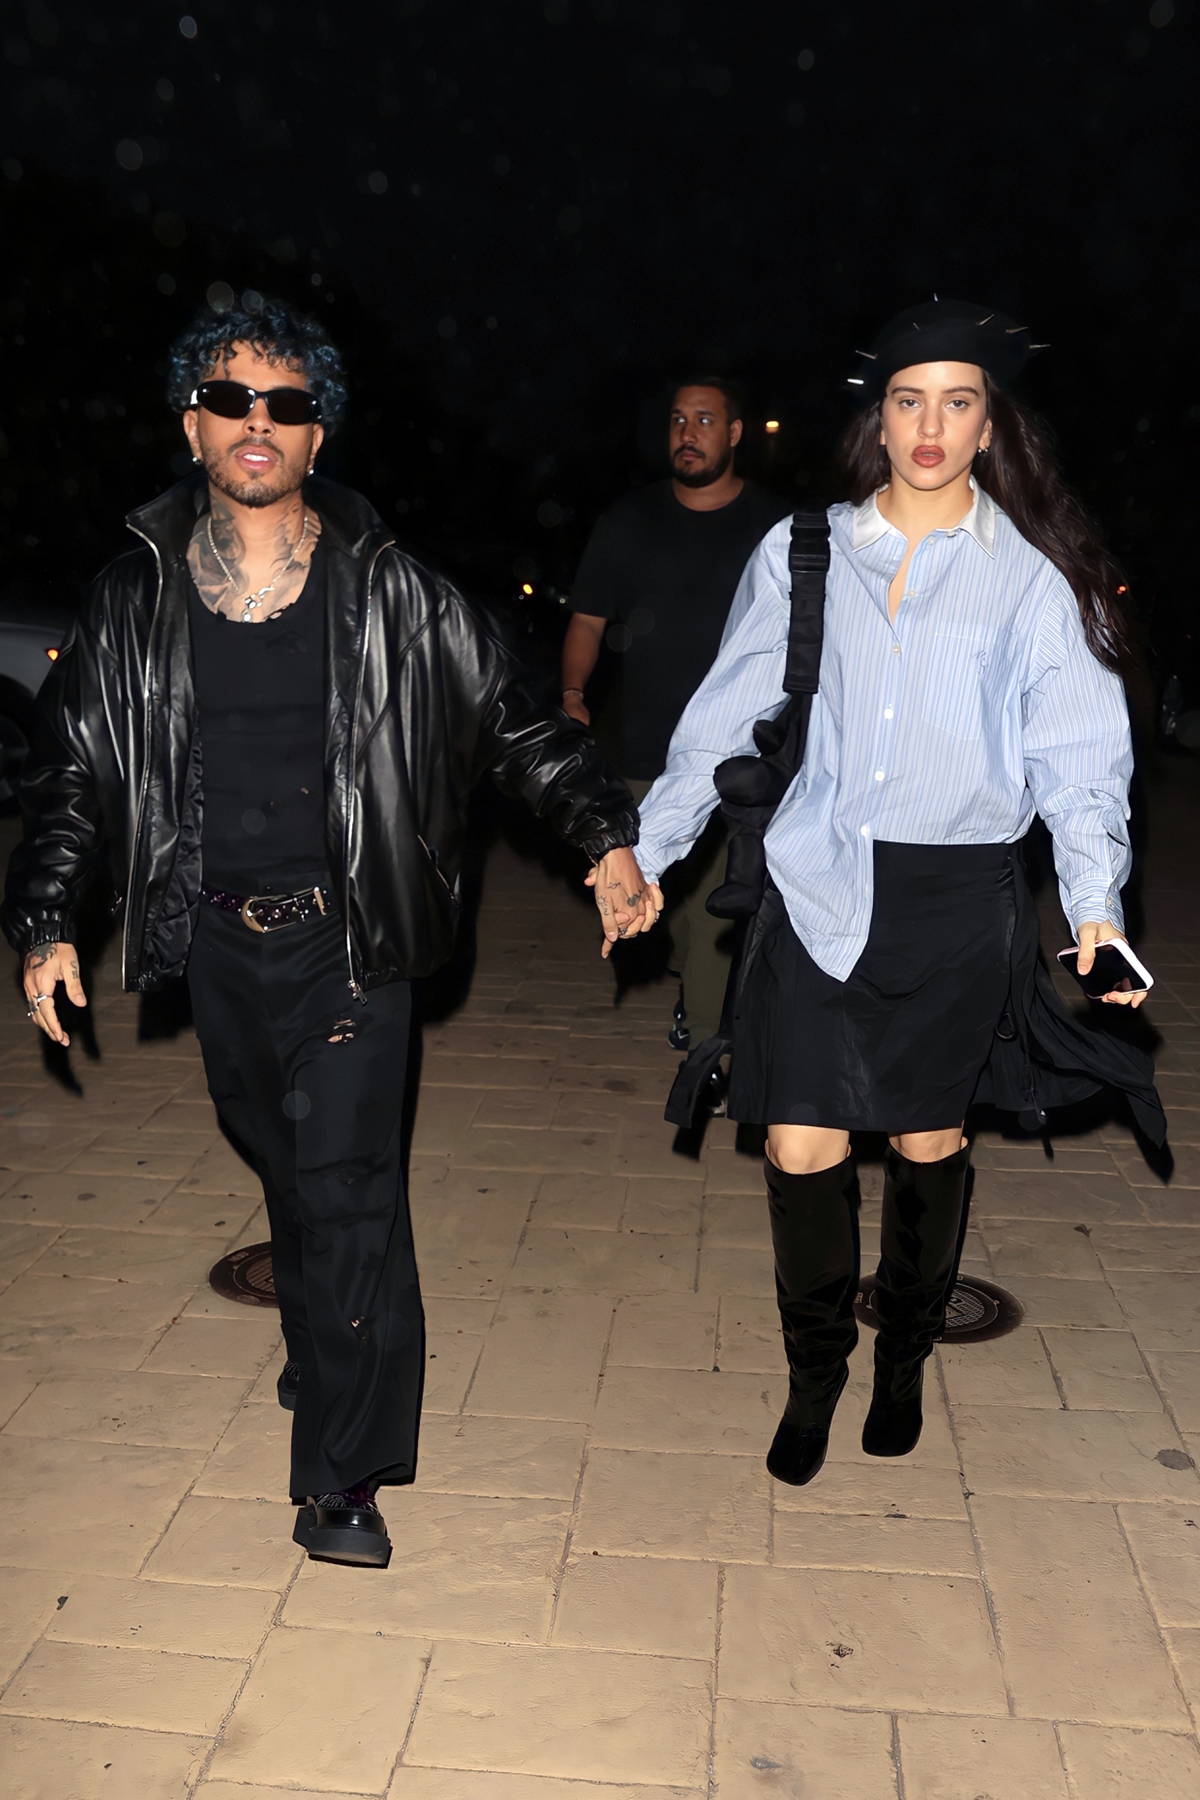 Rosalía and fiancé Rauw Alejandro step out holding hands during a